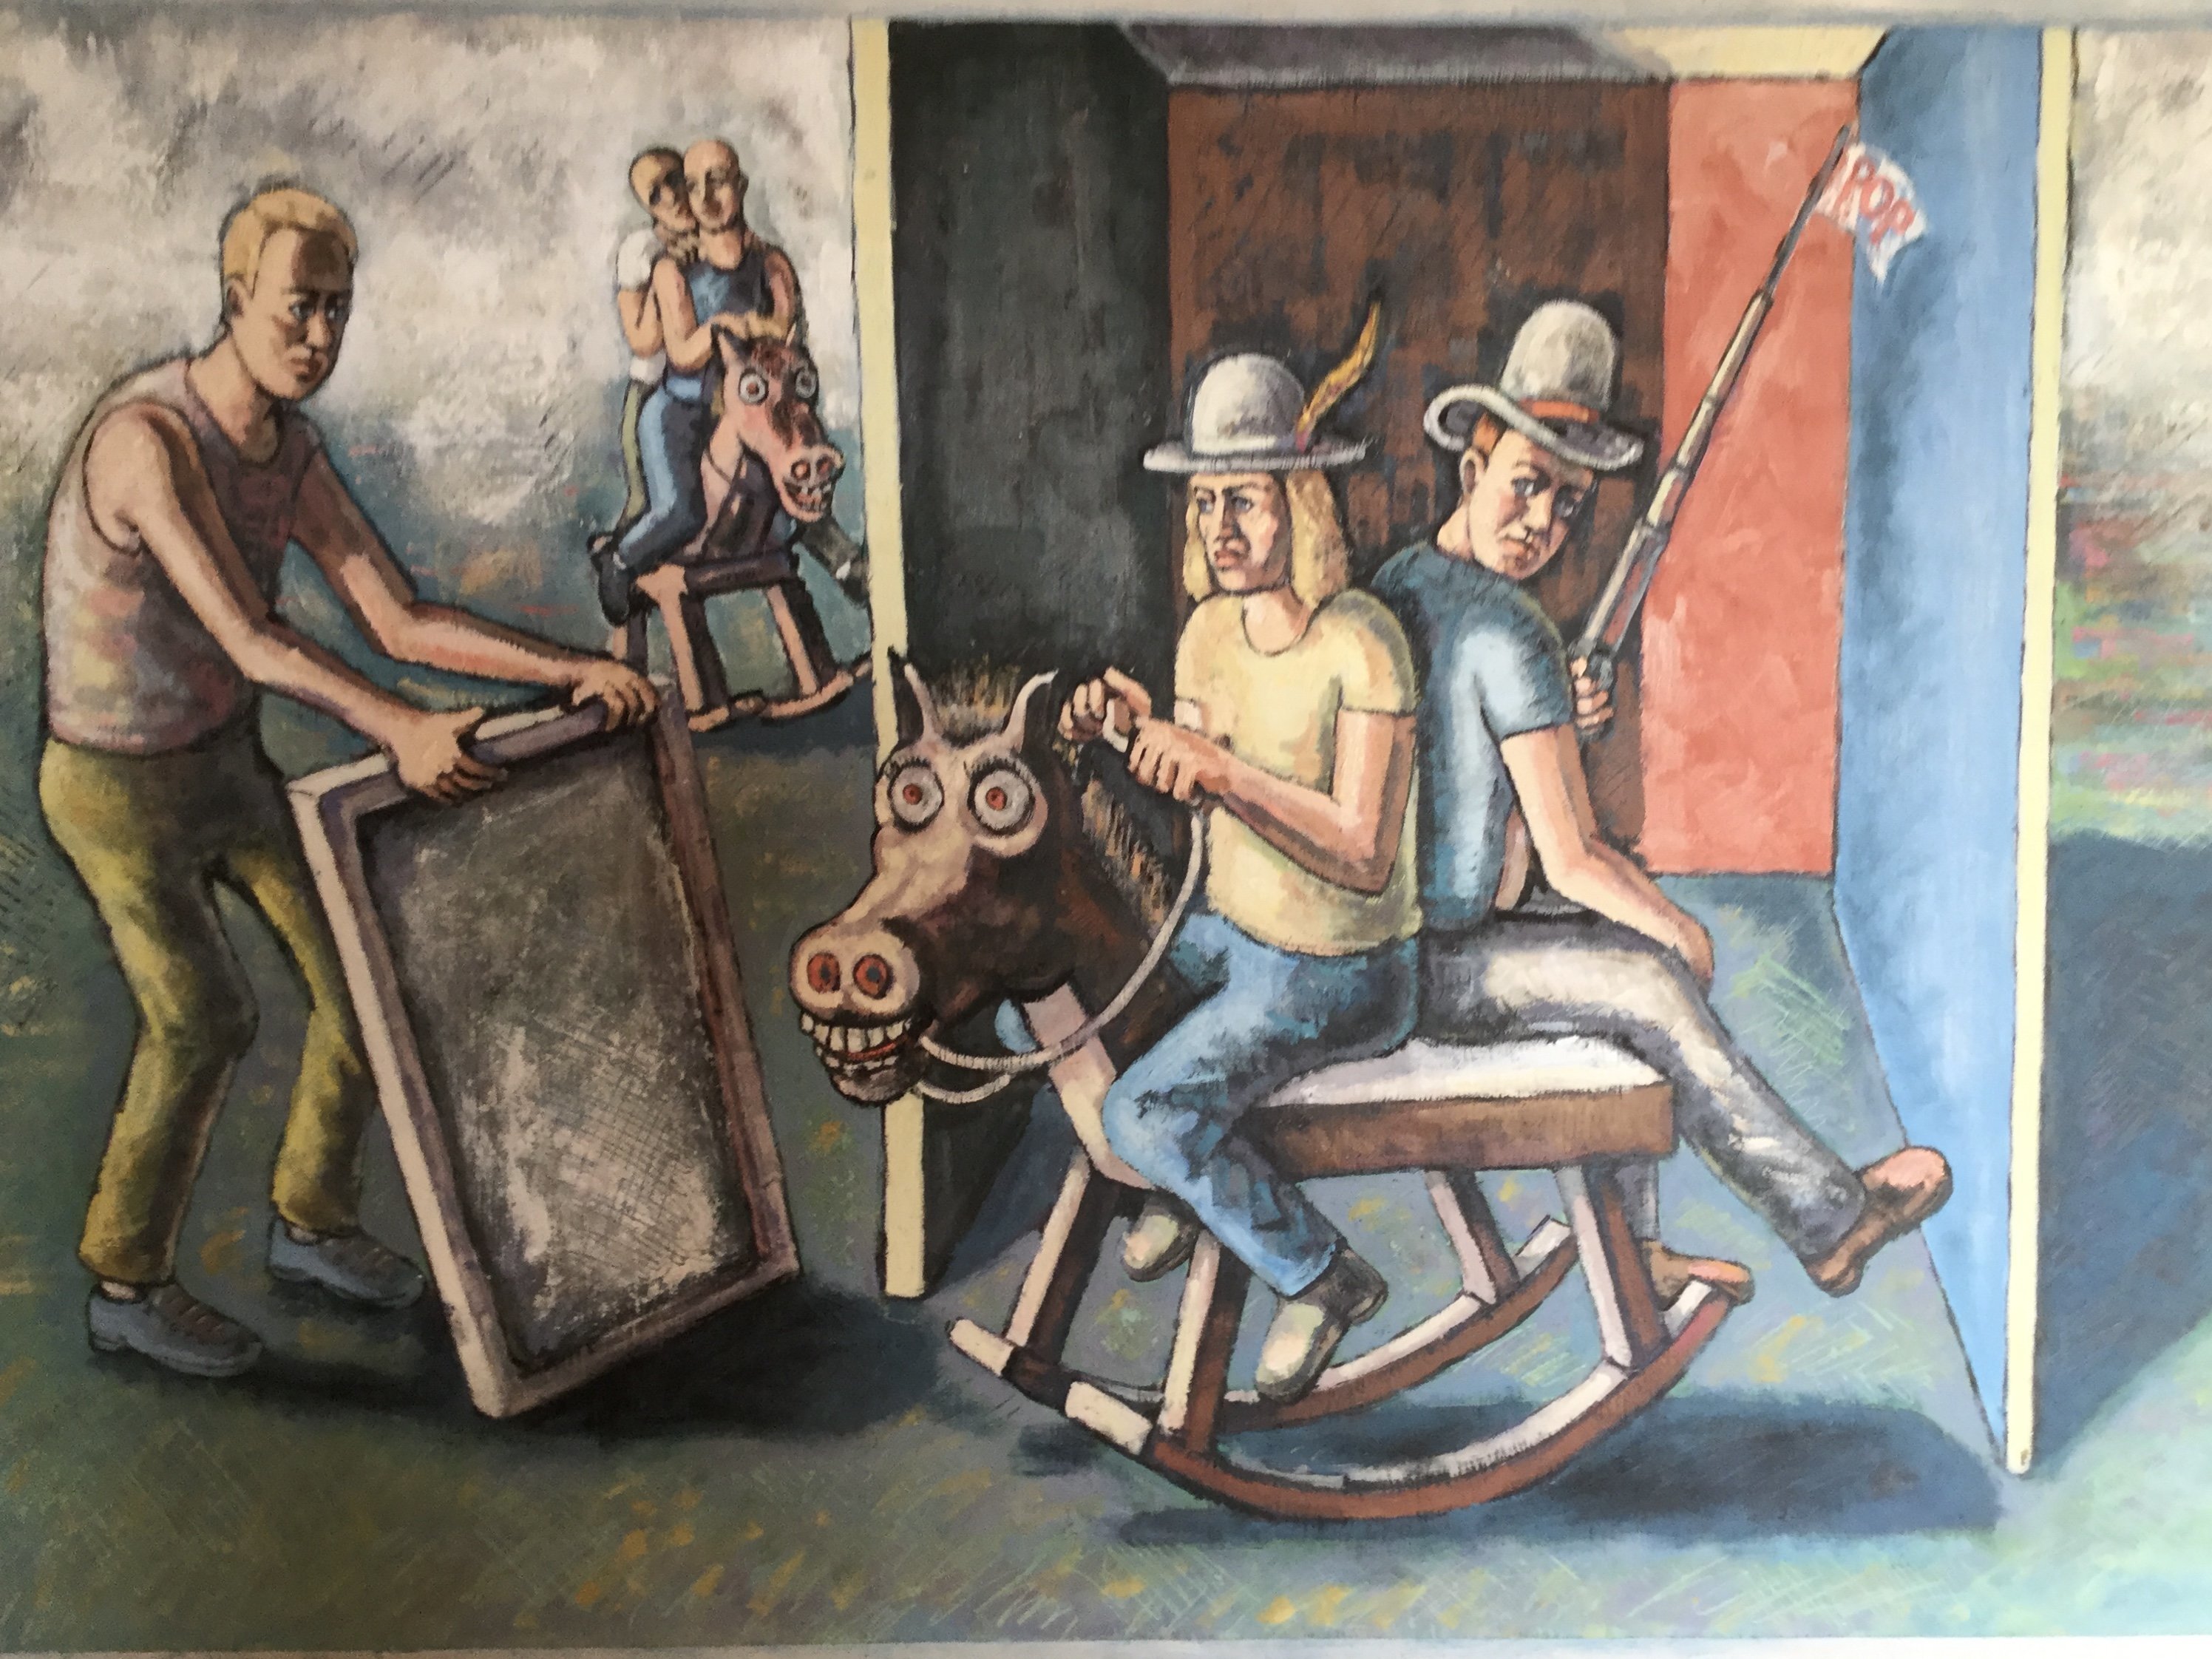 Michael Fornadley; Cowboys On Crazy Horse, 2019, Original Painting Oil, 57 x 34 inches. Artwork description: 241 Literary illusions, 2 cowboys on crazy horse with rocker base, man holding a canvas or mirror, Fog coming in behind 2 distant riders.Compositional walls, leading the eye and confining the center figures. ...